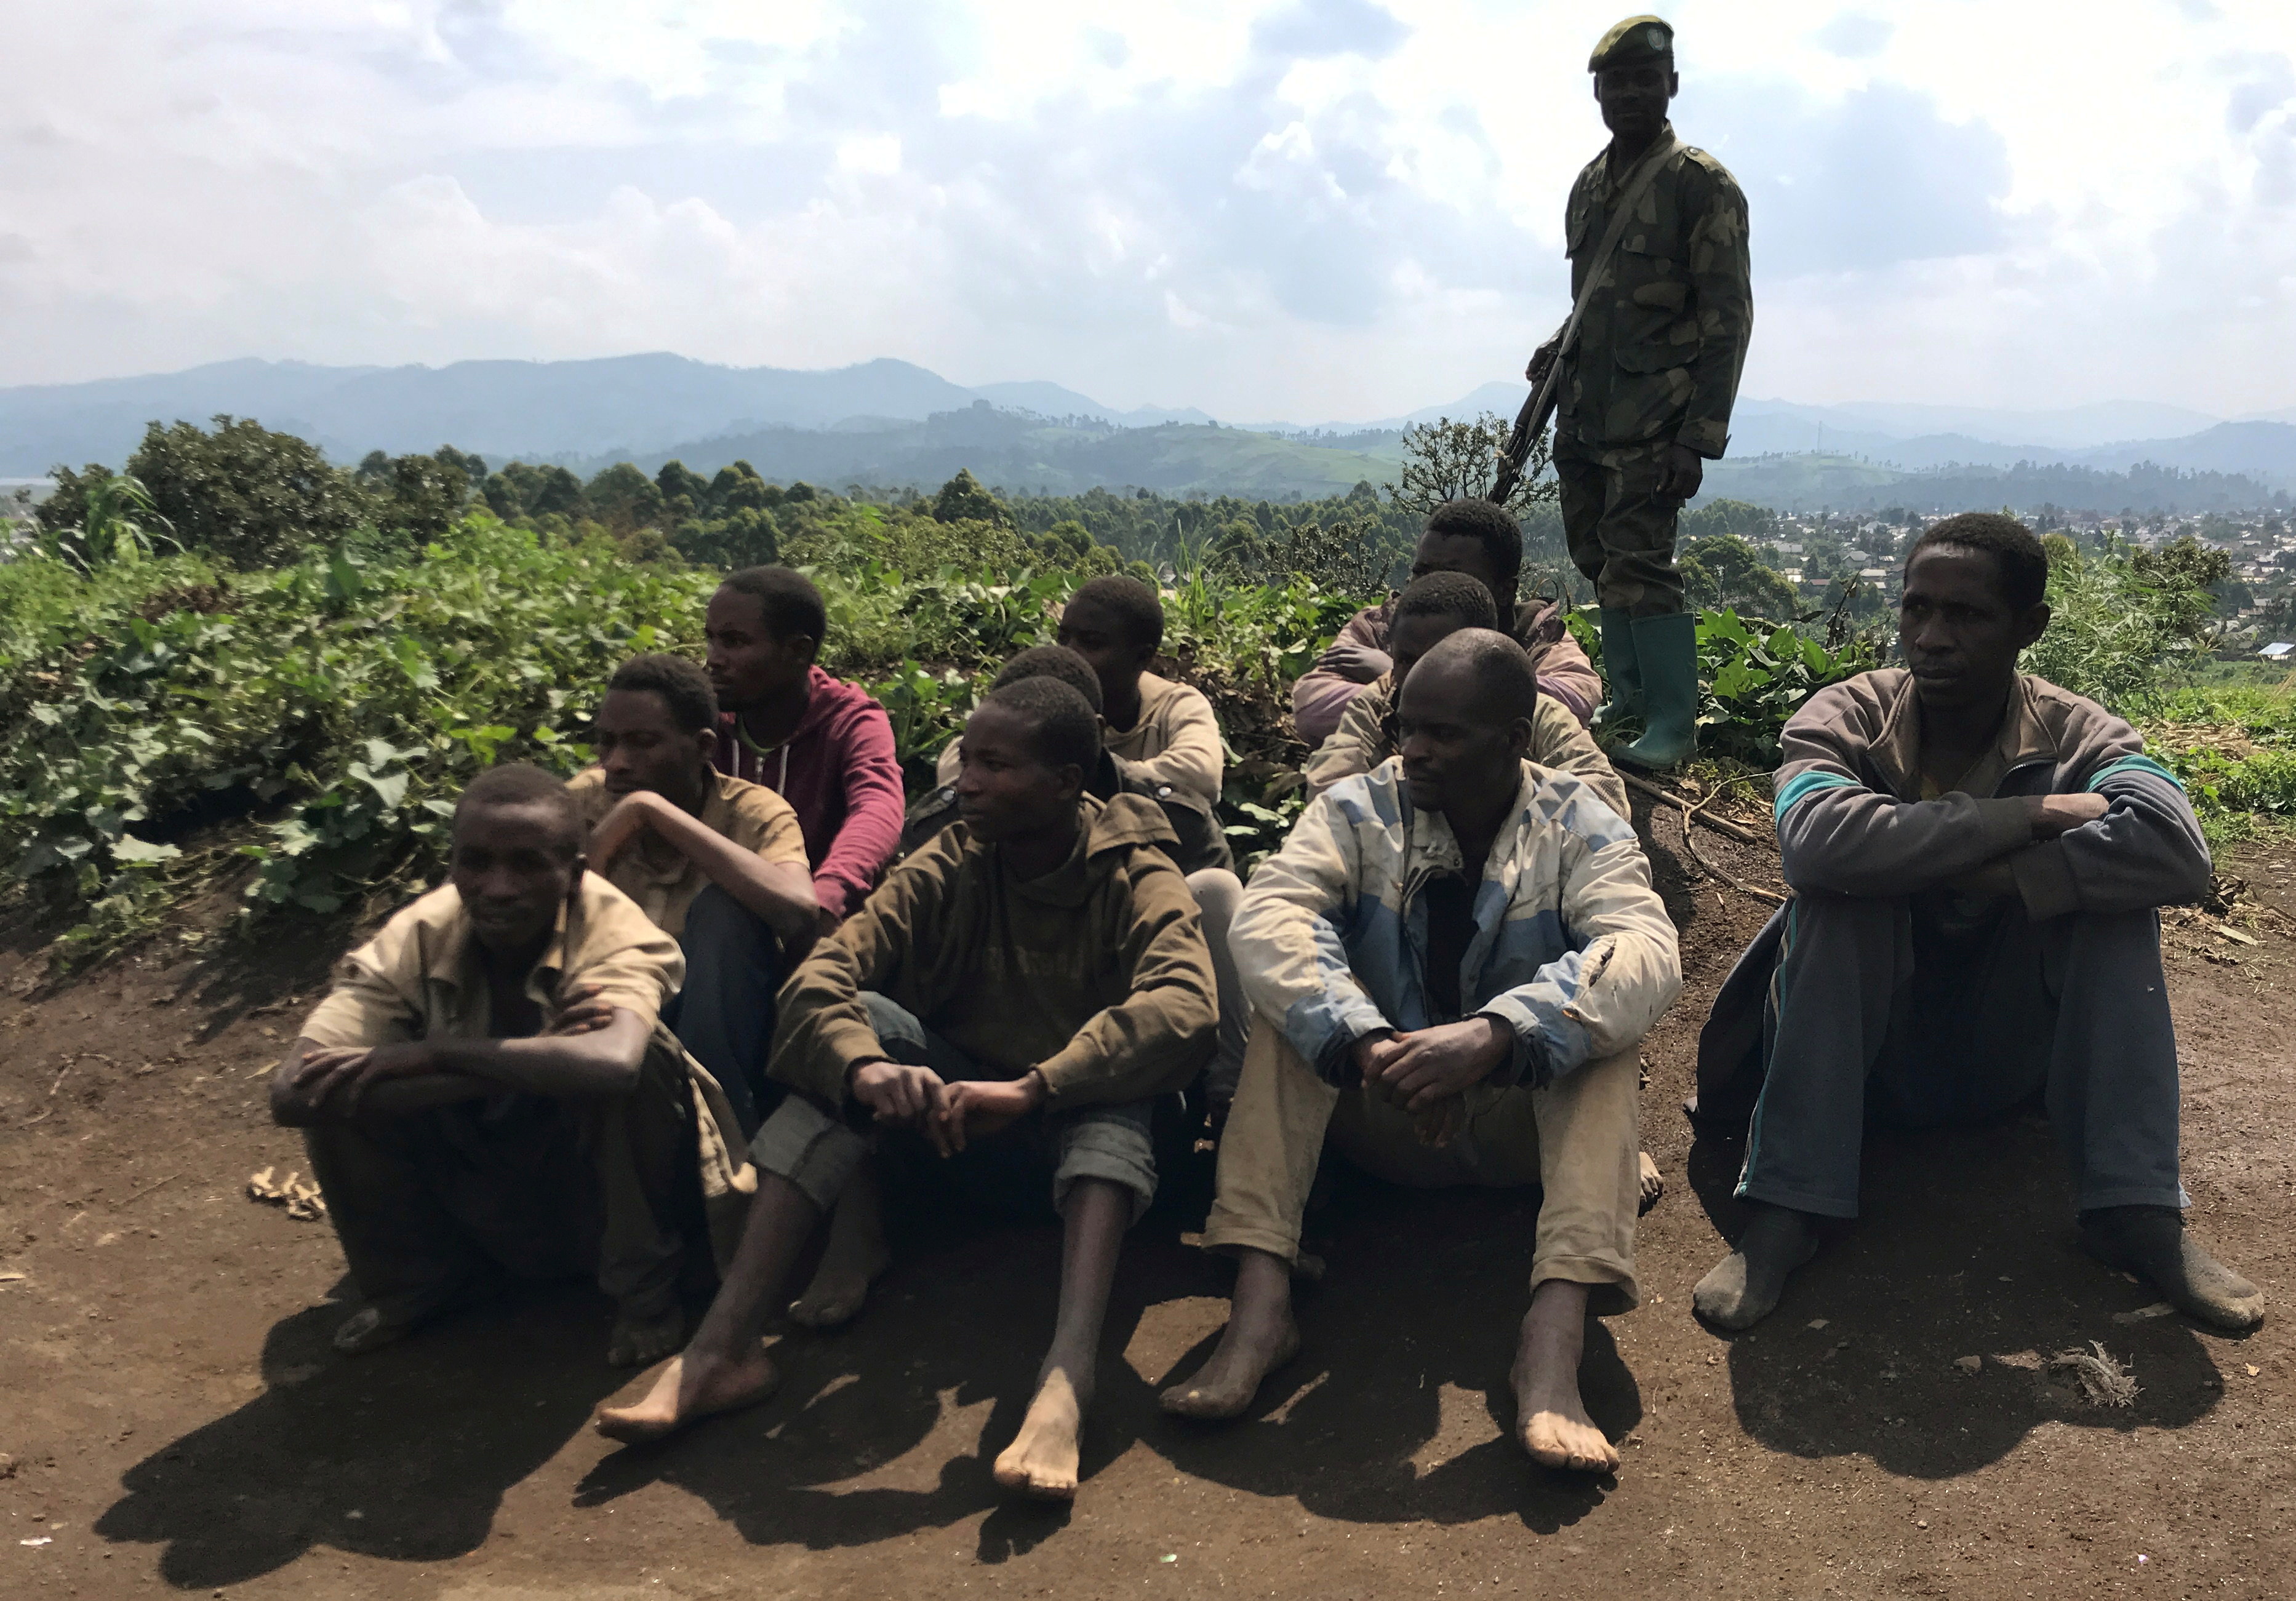 Congolese Mai-Mai rebels who surrendered their weapons to government officials sit guarded in Kitchanga, in the Masisi territory of North Kivu province, in the Democratic Republic of Congo June 21, 2021. Picture taken June 21, 2021. REUTERS/Djaaffar Al Katanty